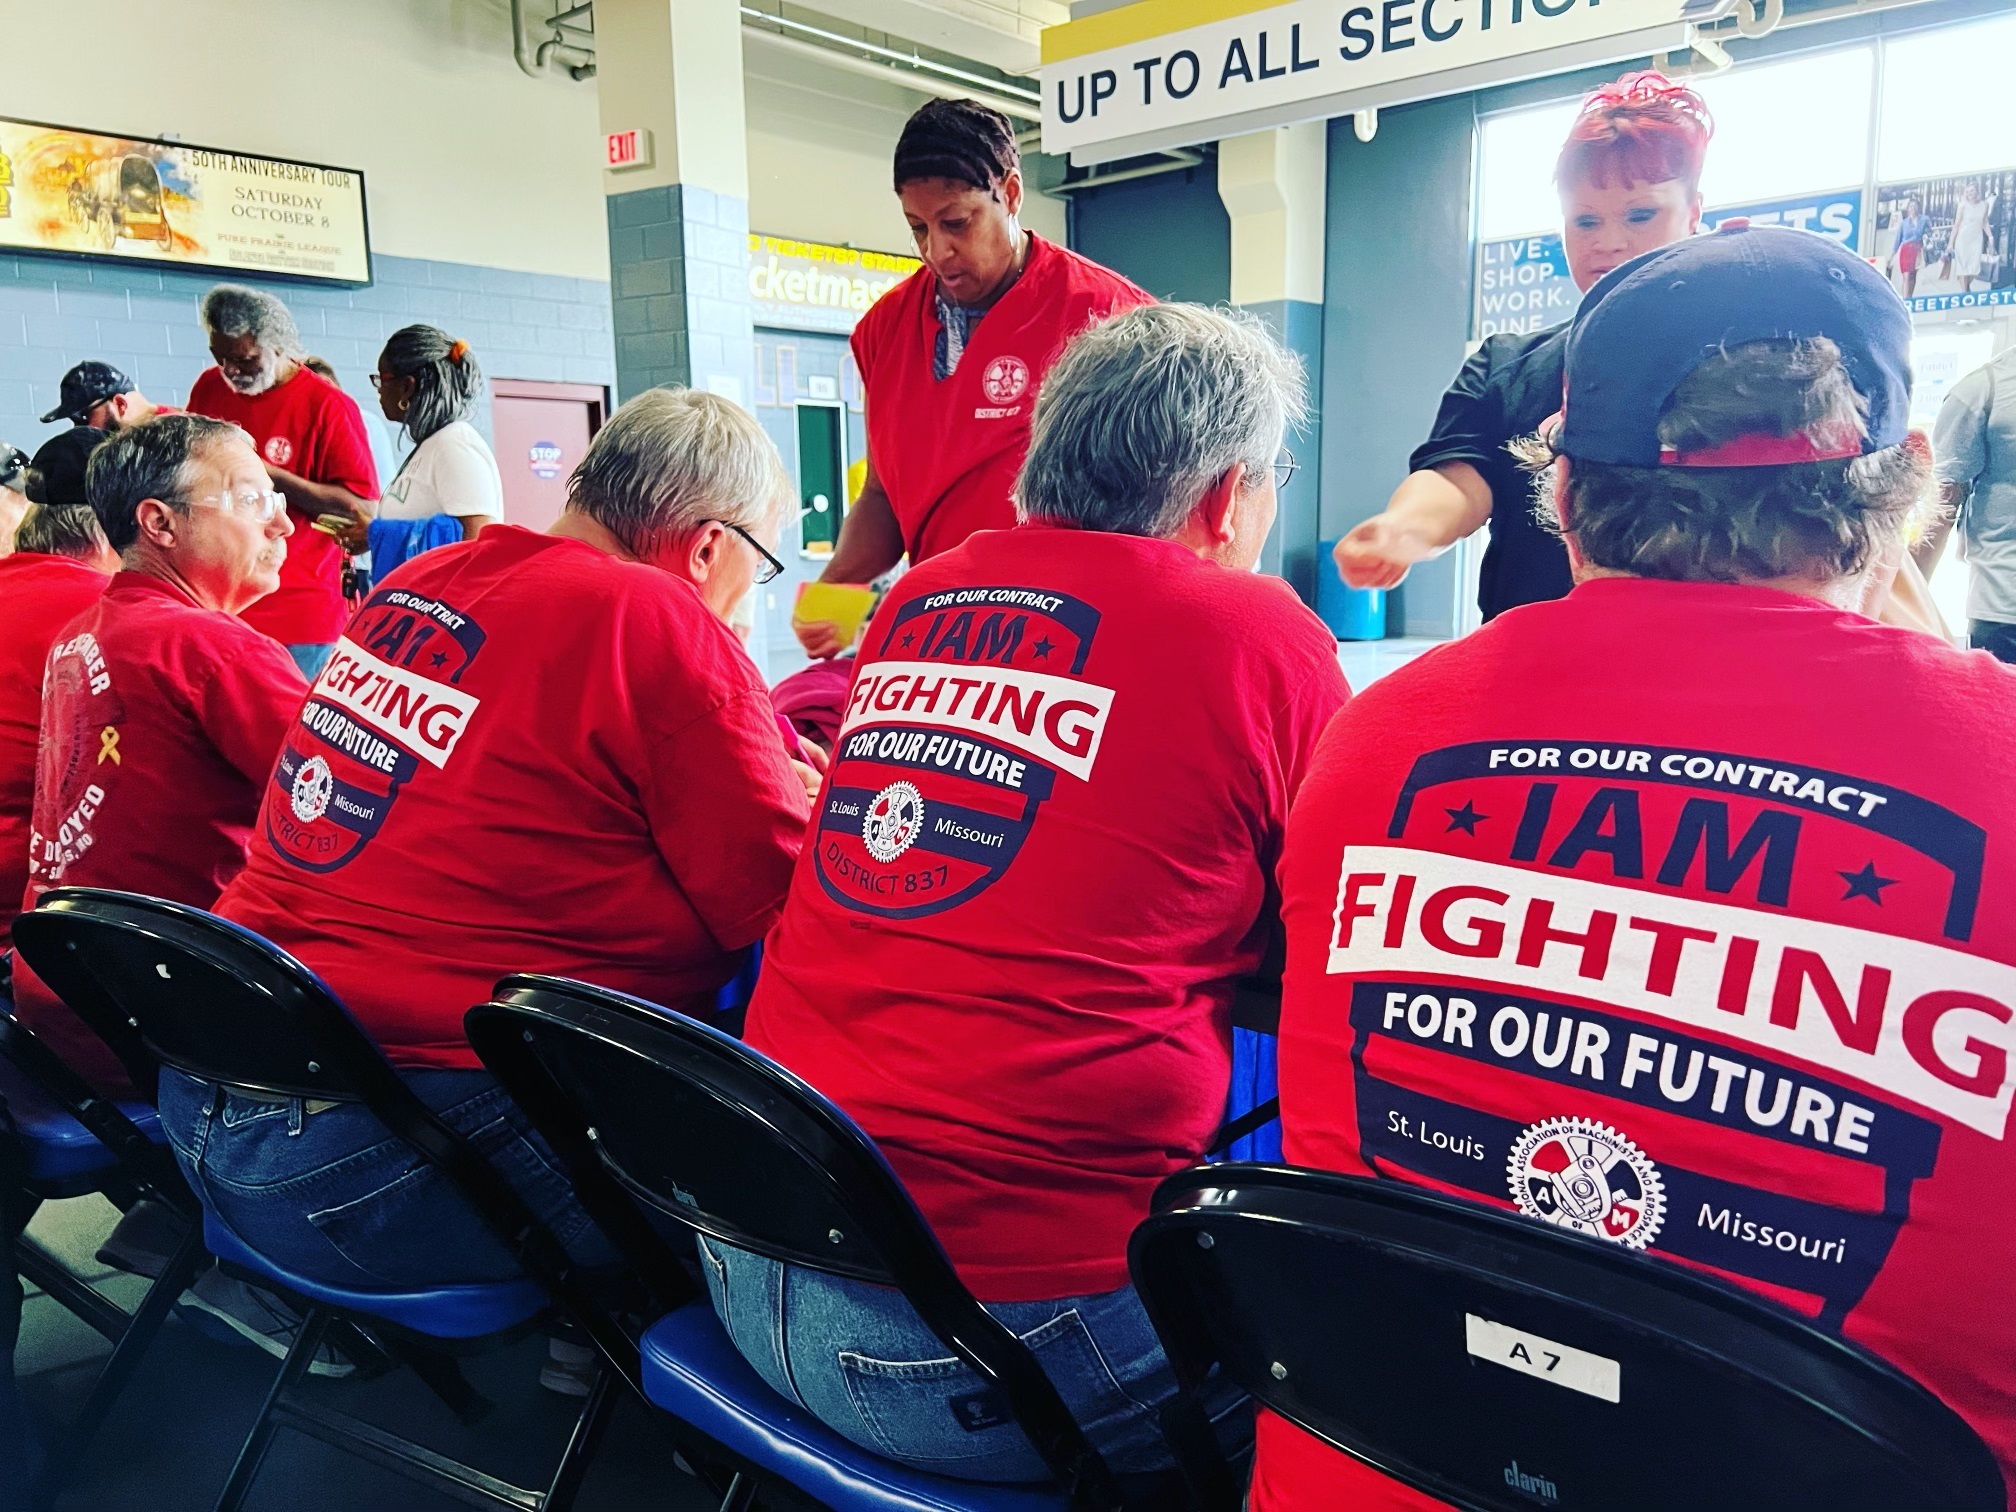 Machinists Union Members at Boeing St. Louis to Vote on Modified Contract Offer, Temporarily Averting Imminent Strike